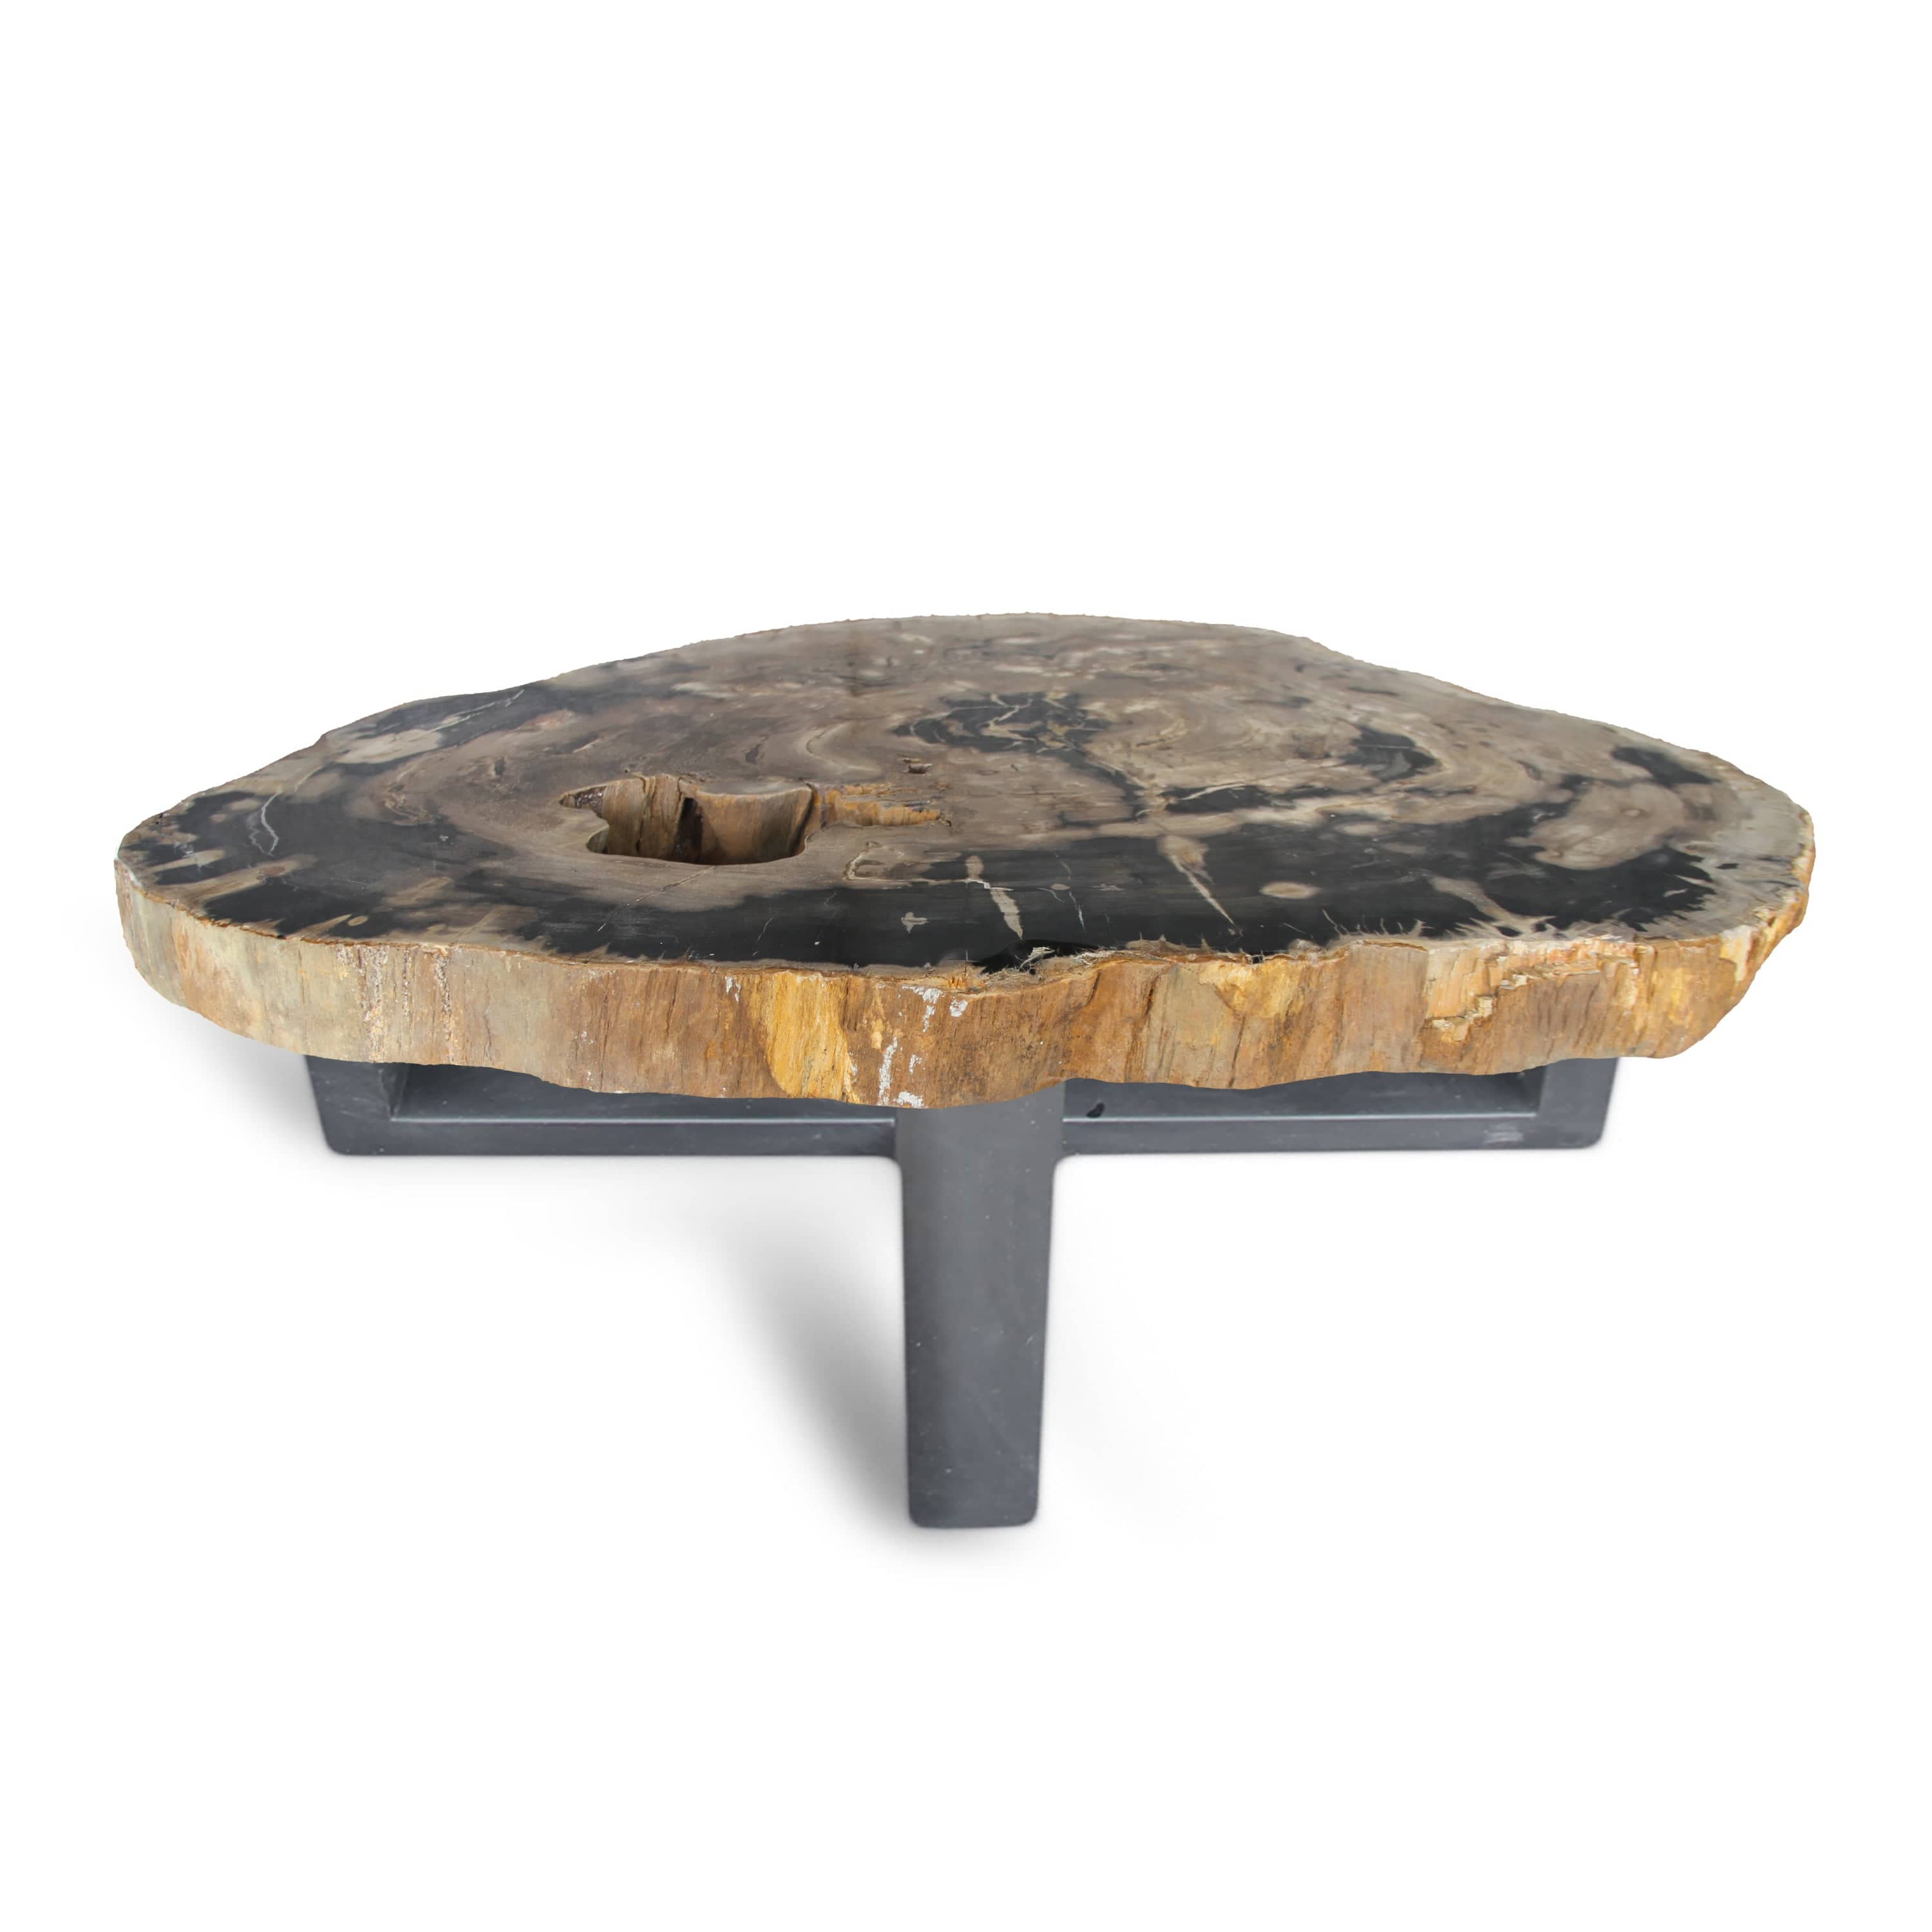 Kalifano Petrified Wood Petrified Wood Round Slab Coffee Table from Indonesia - 48" / 330 lbs PWT12000.003